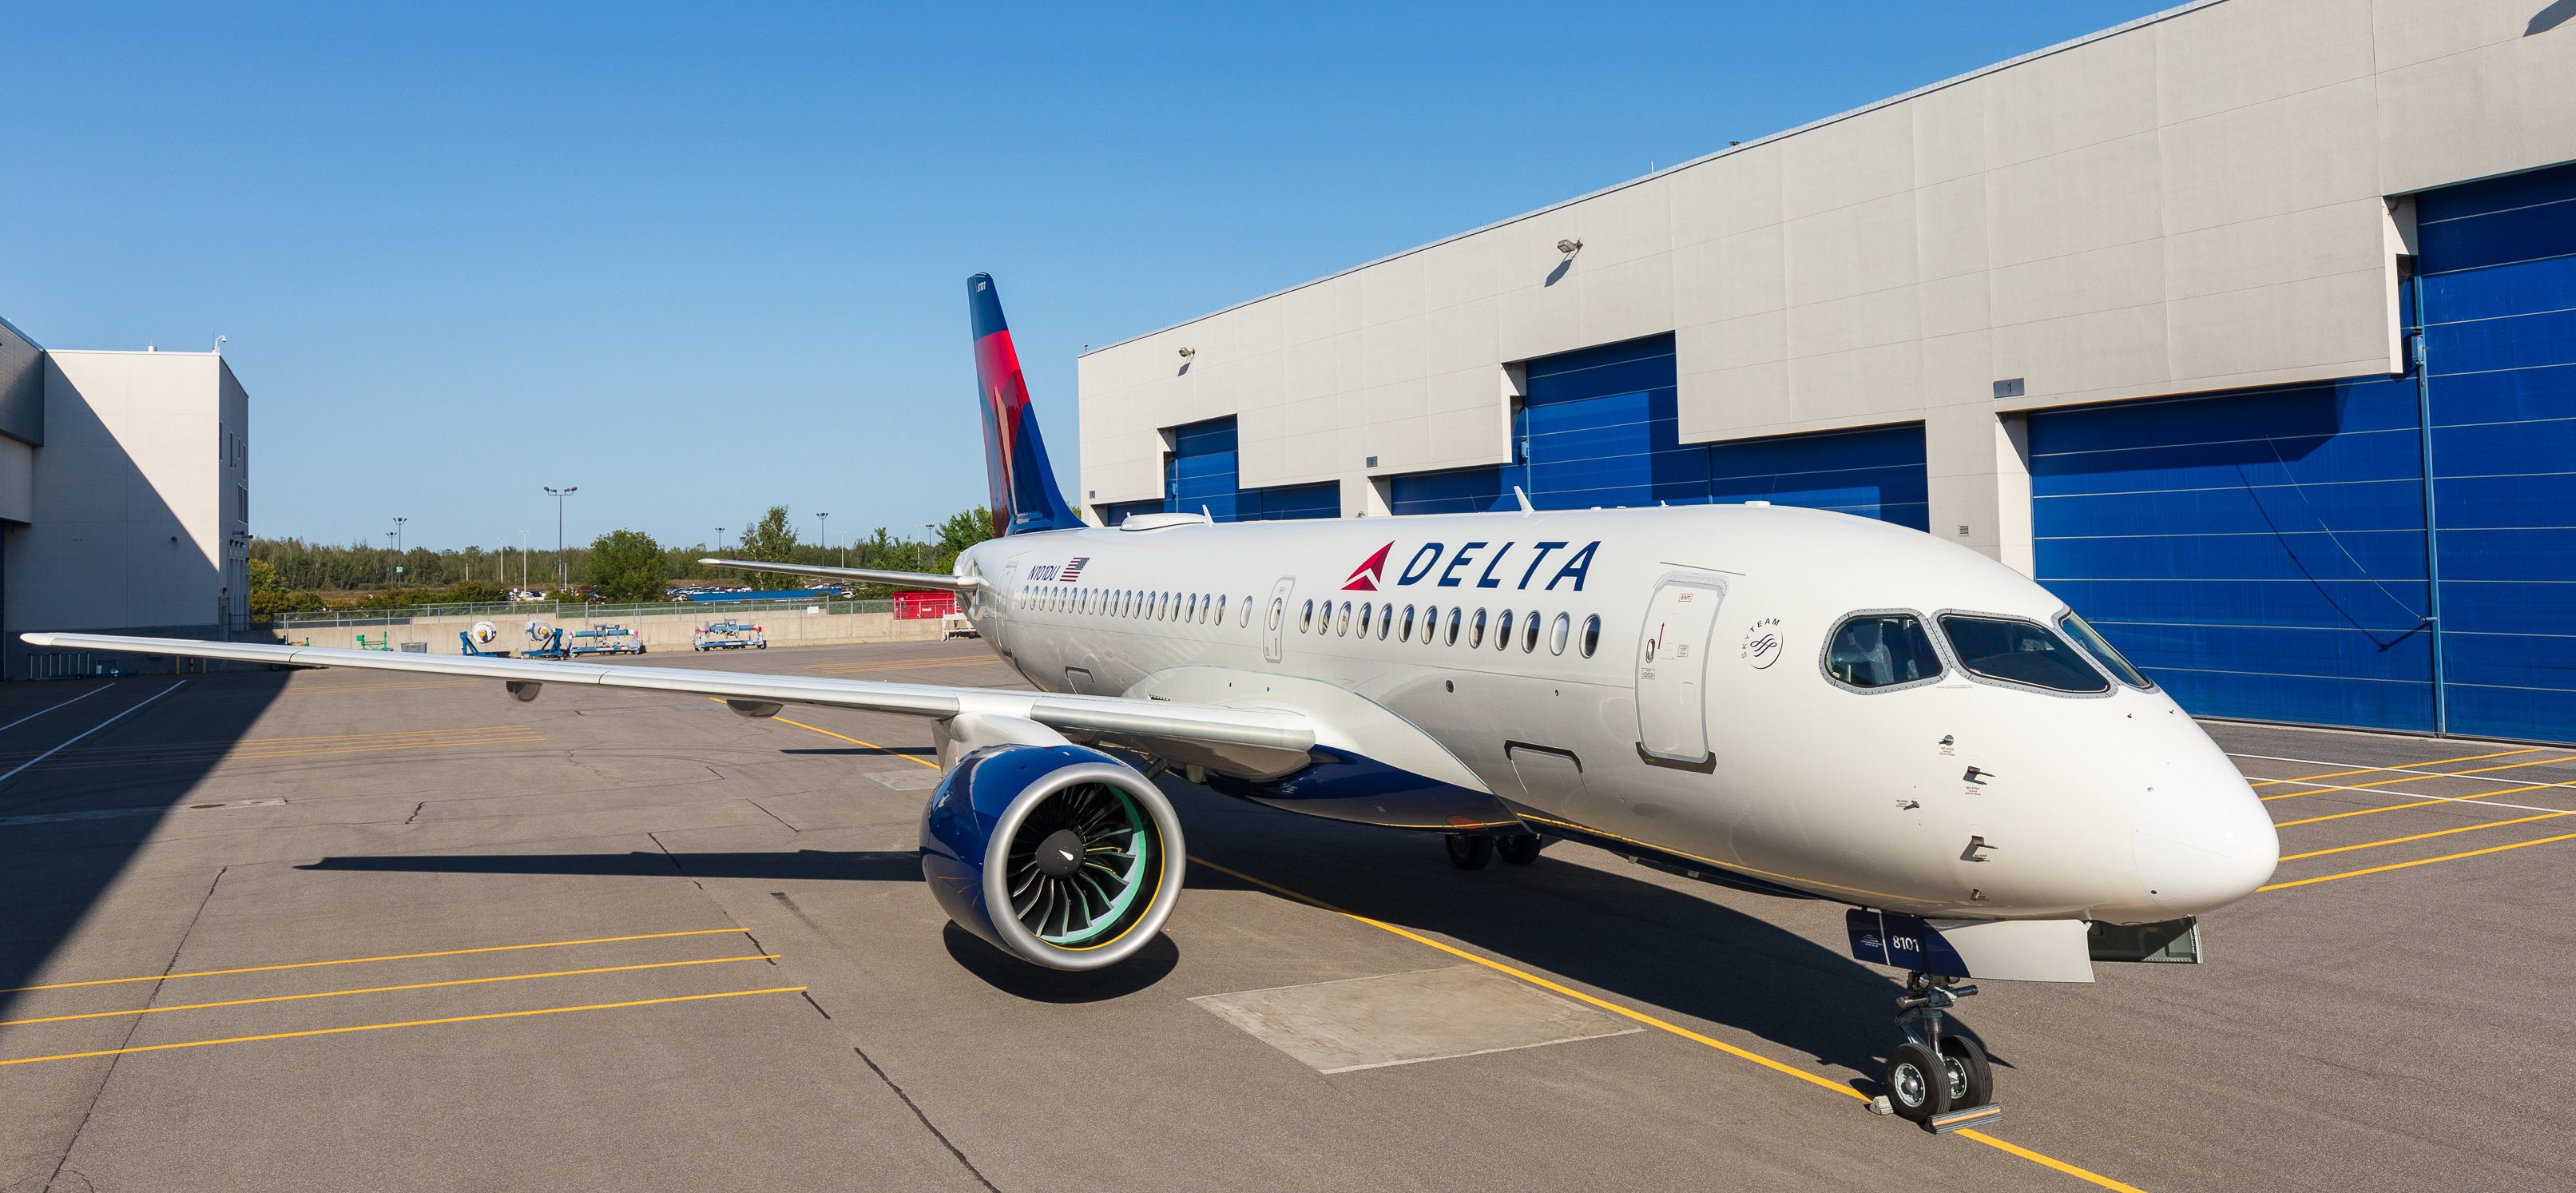 Delta Air Lines Liveries Through the Years - Airport Spotting